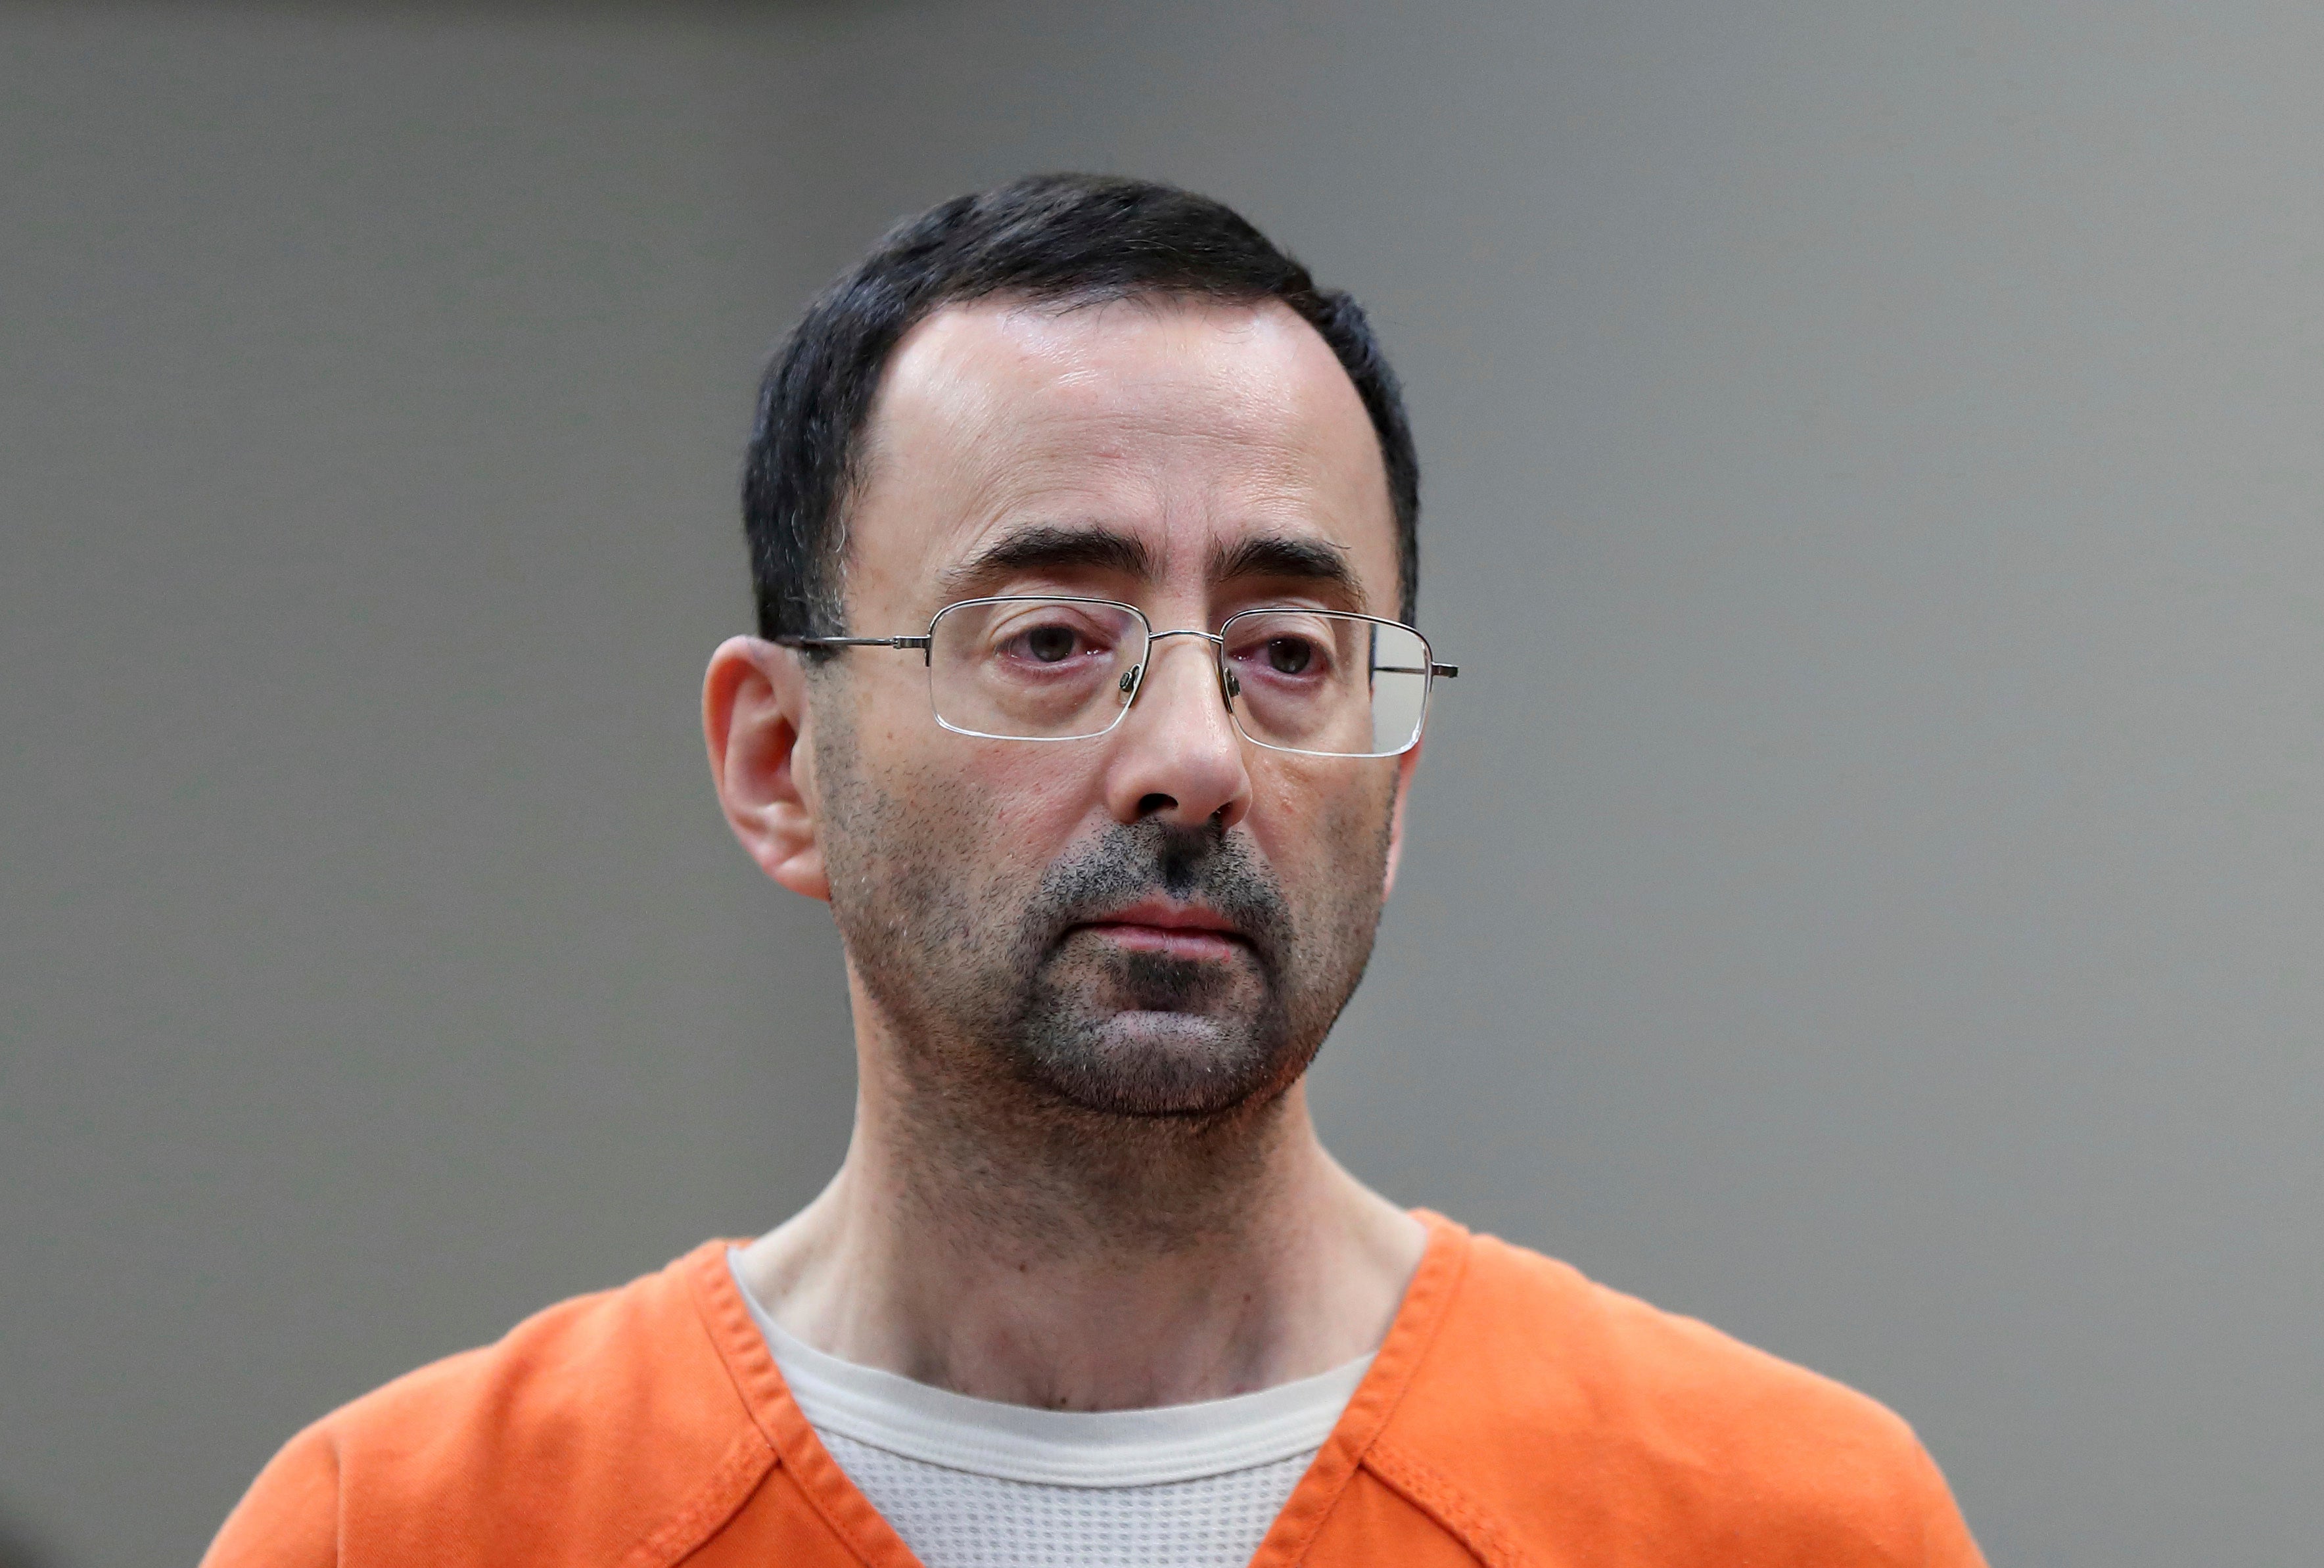 Larry Nassar preyed on girls and young women in his role as USA Gymnastics doctor